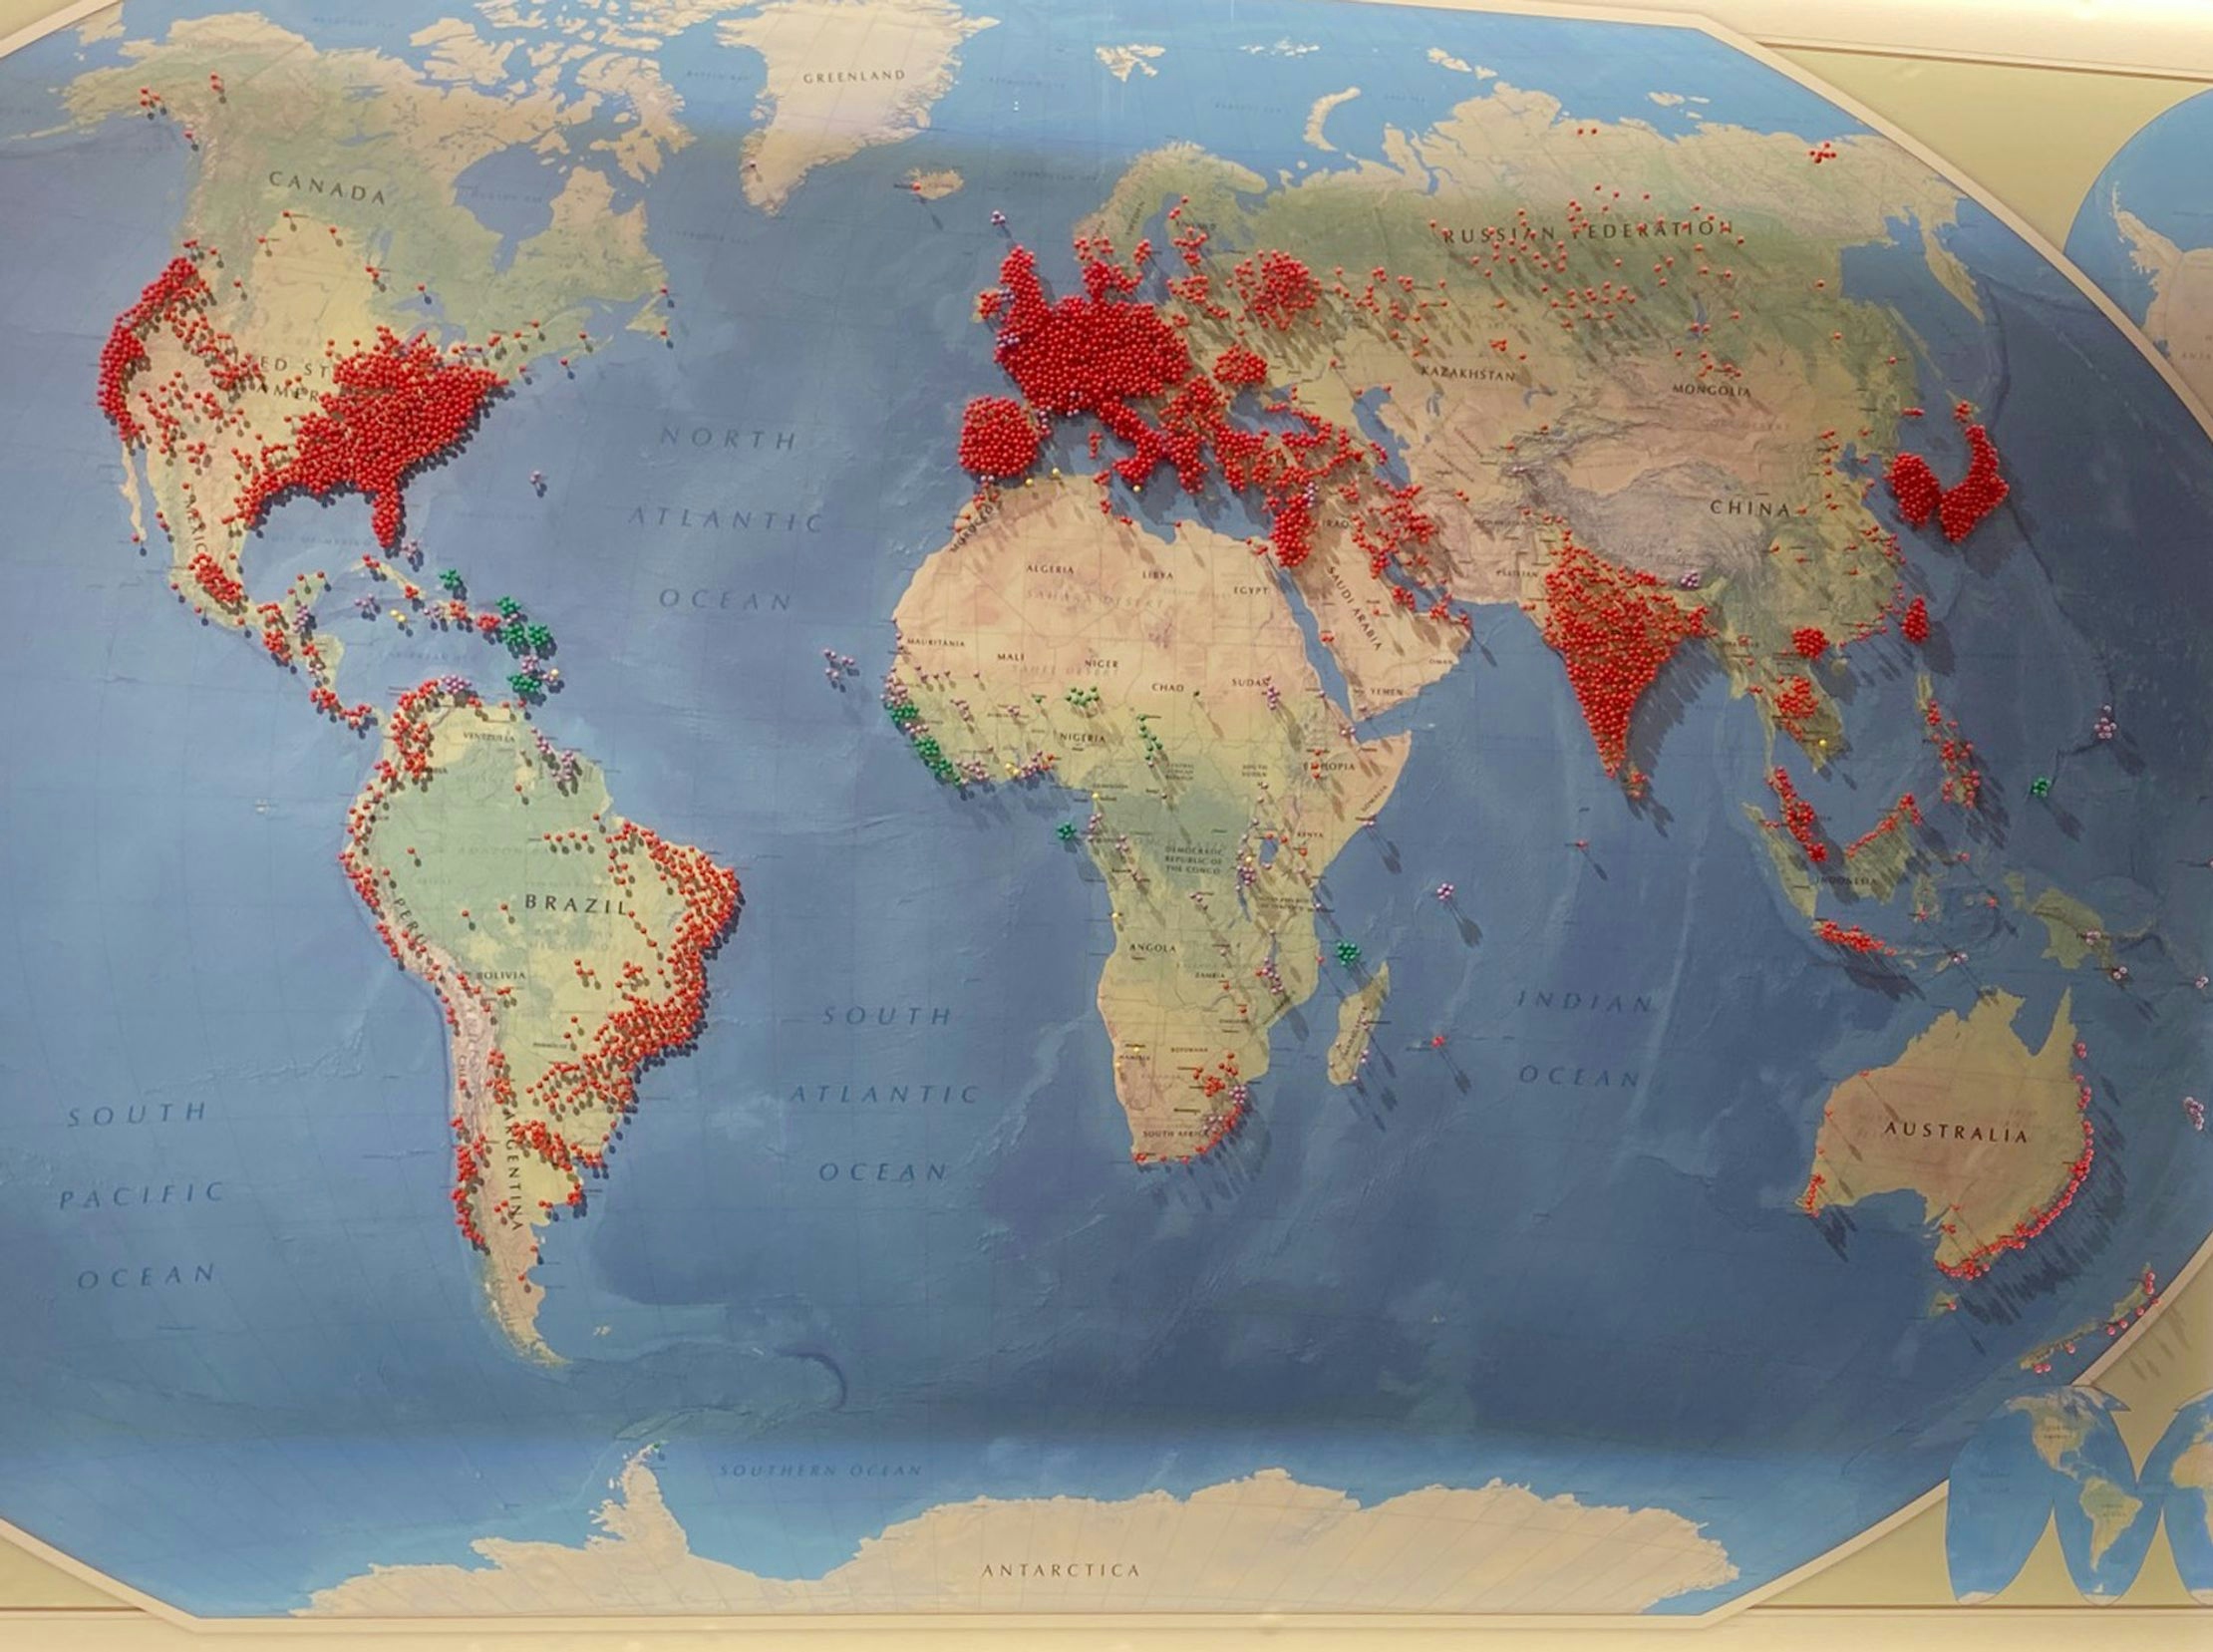 A paper world map covered in red pins where COVID cases have occurred. 